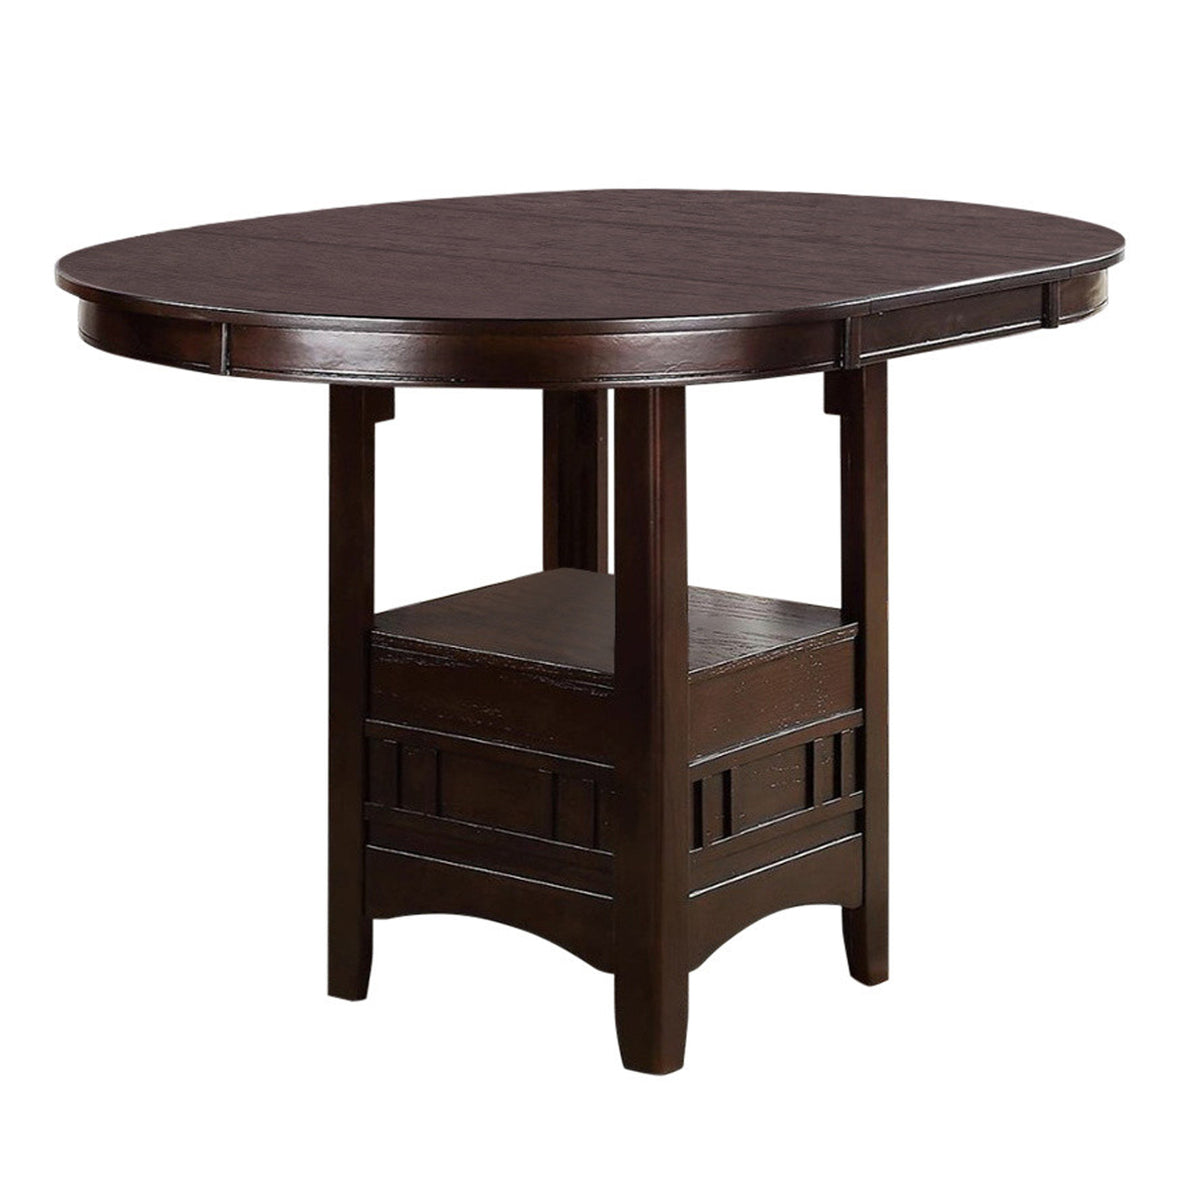 Wooden Counter Height Table, Brown - BM171297